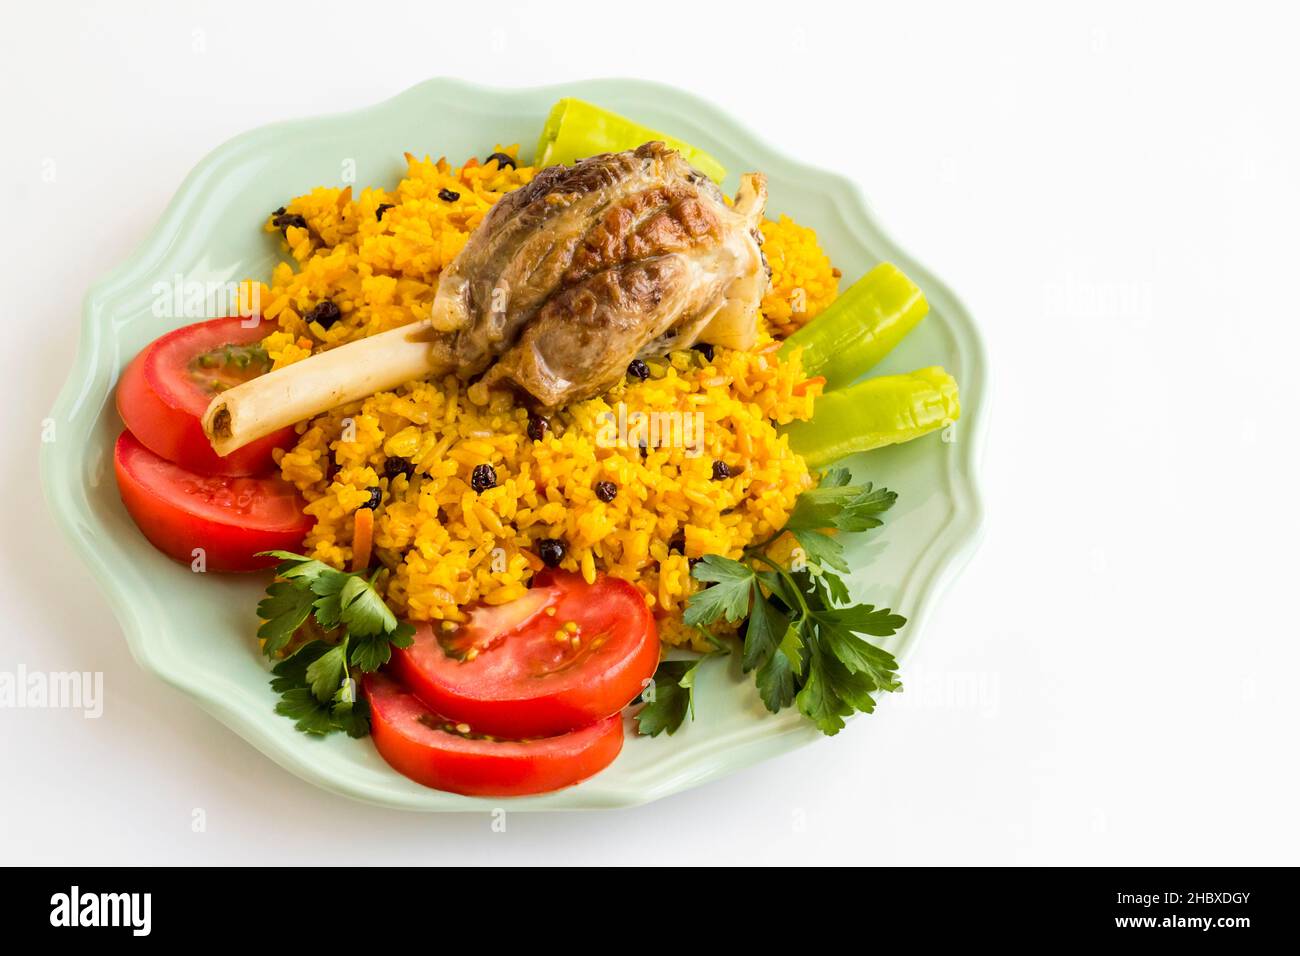 Traditional Arabic Rice,Pilaff with tomato,pepper,parsley and lamb shank in plate on white surface.Sacrifice Feast Concept Stock Photo